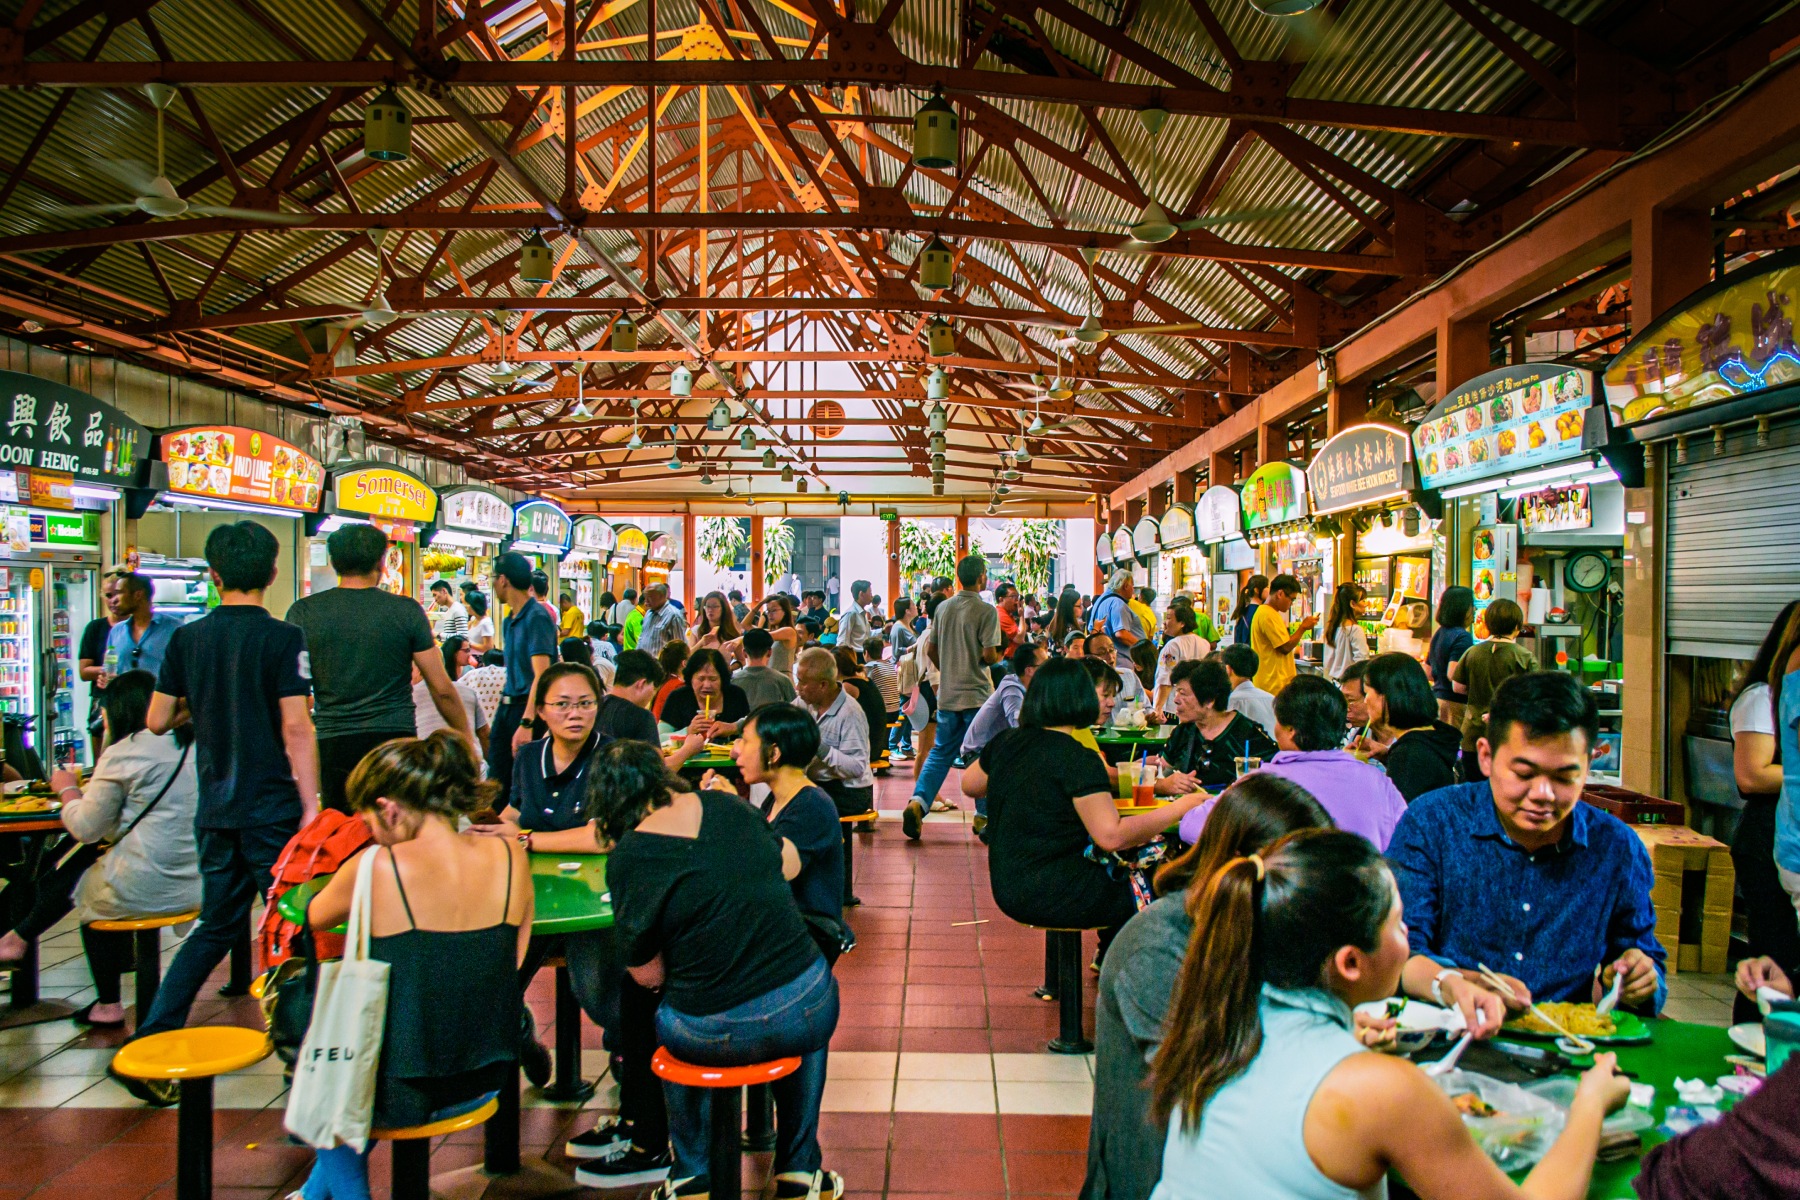 Busy hawker center with food stalls and customers, enjoying Singaporean cuisine